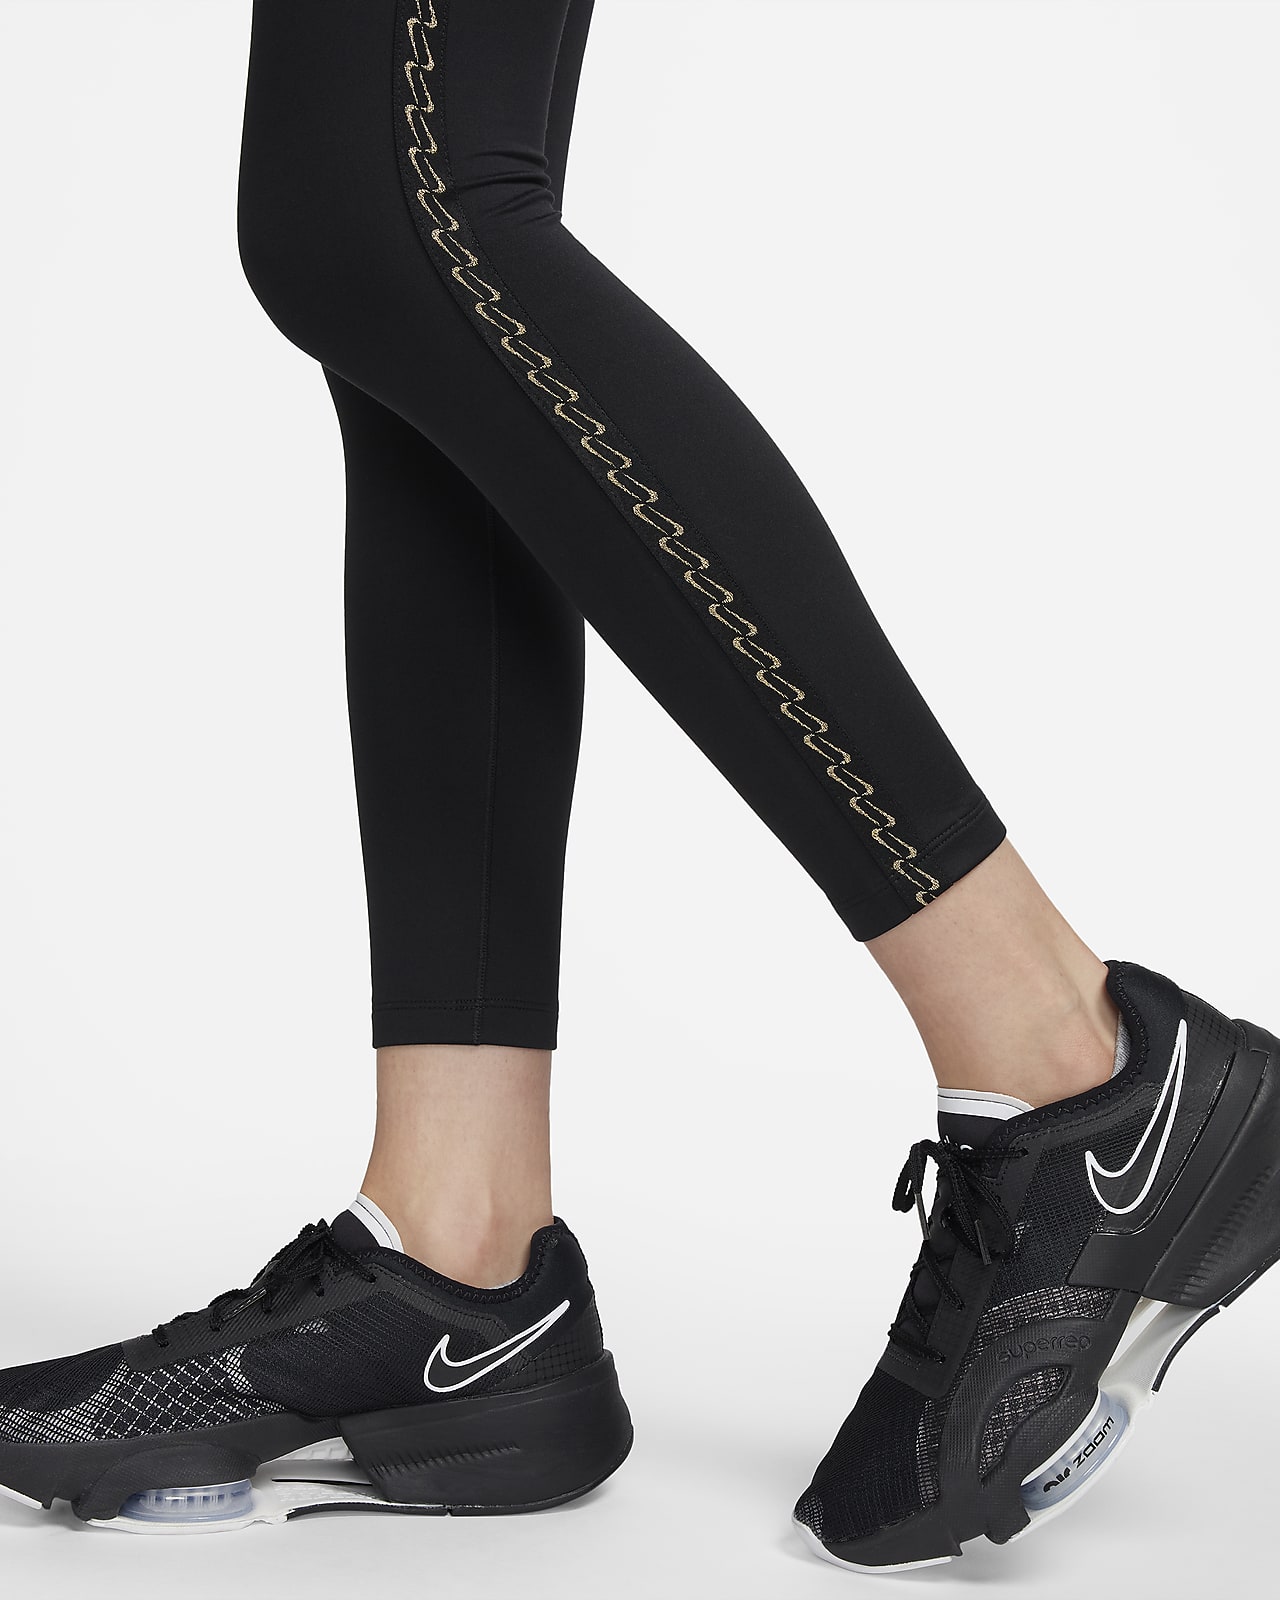 Nike Tights THERMA-FIT in black